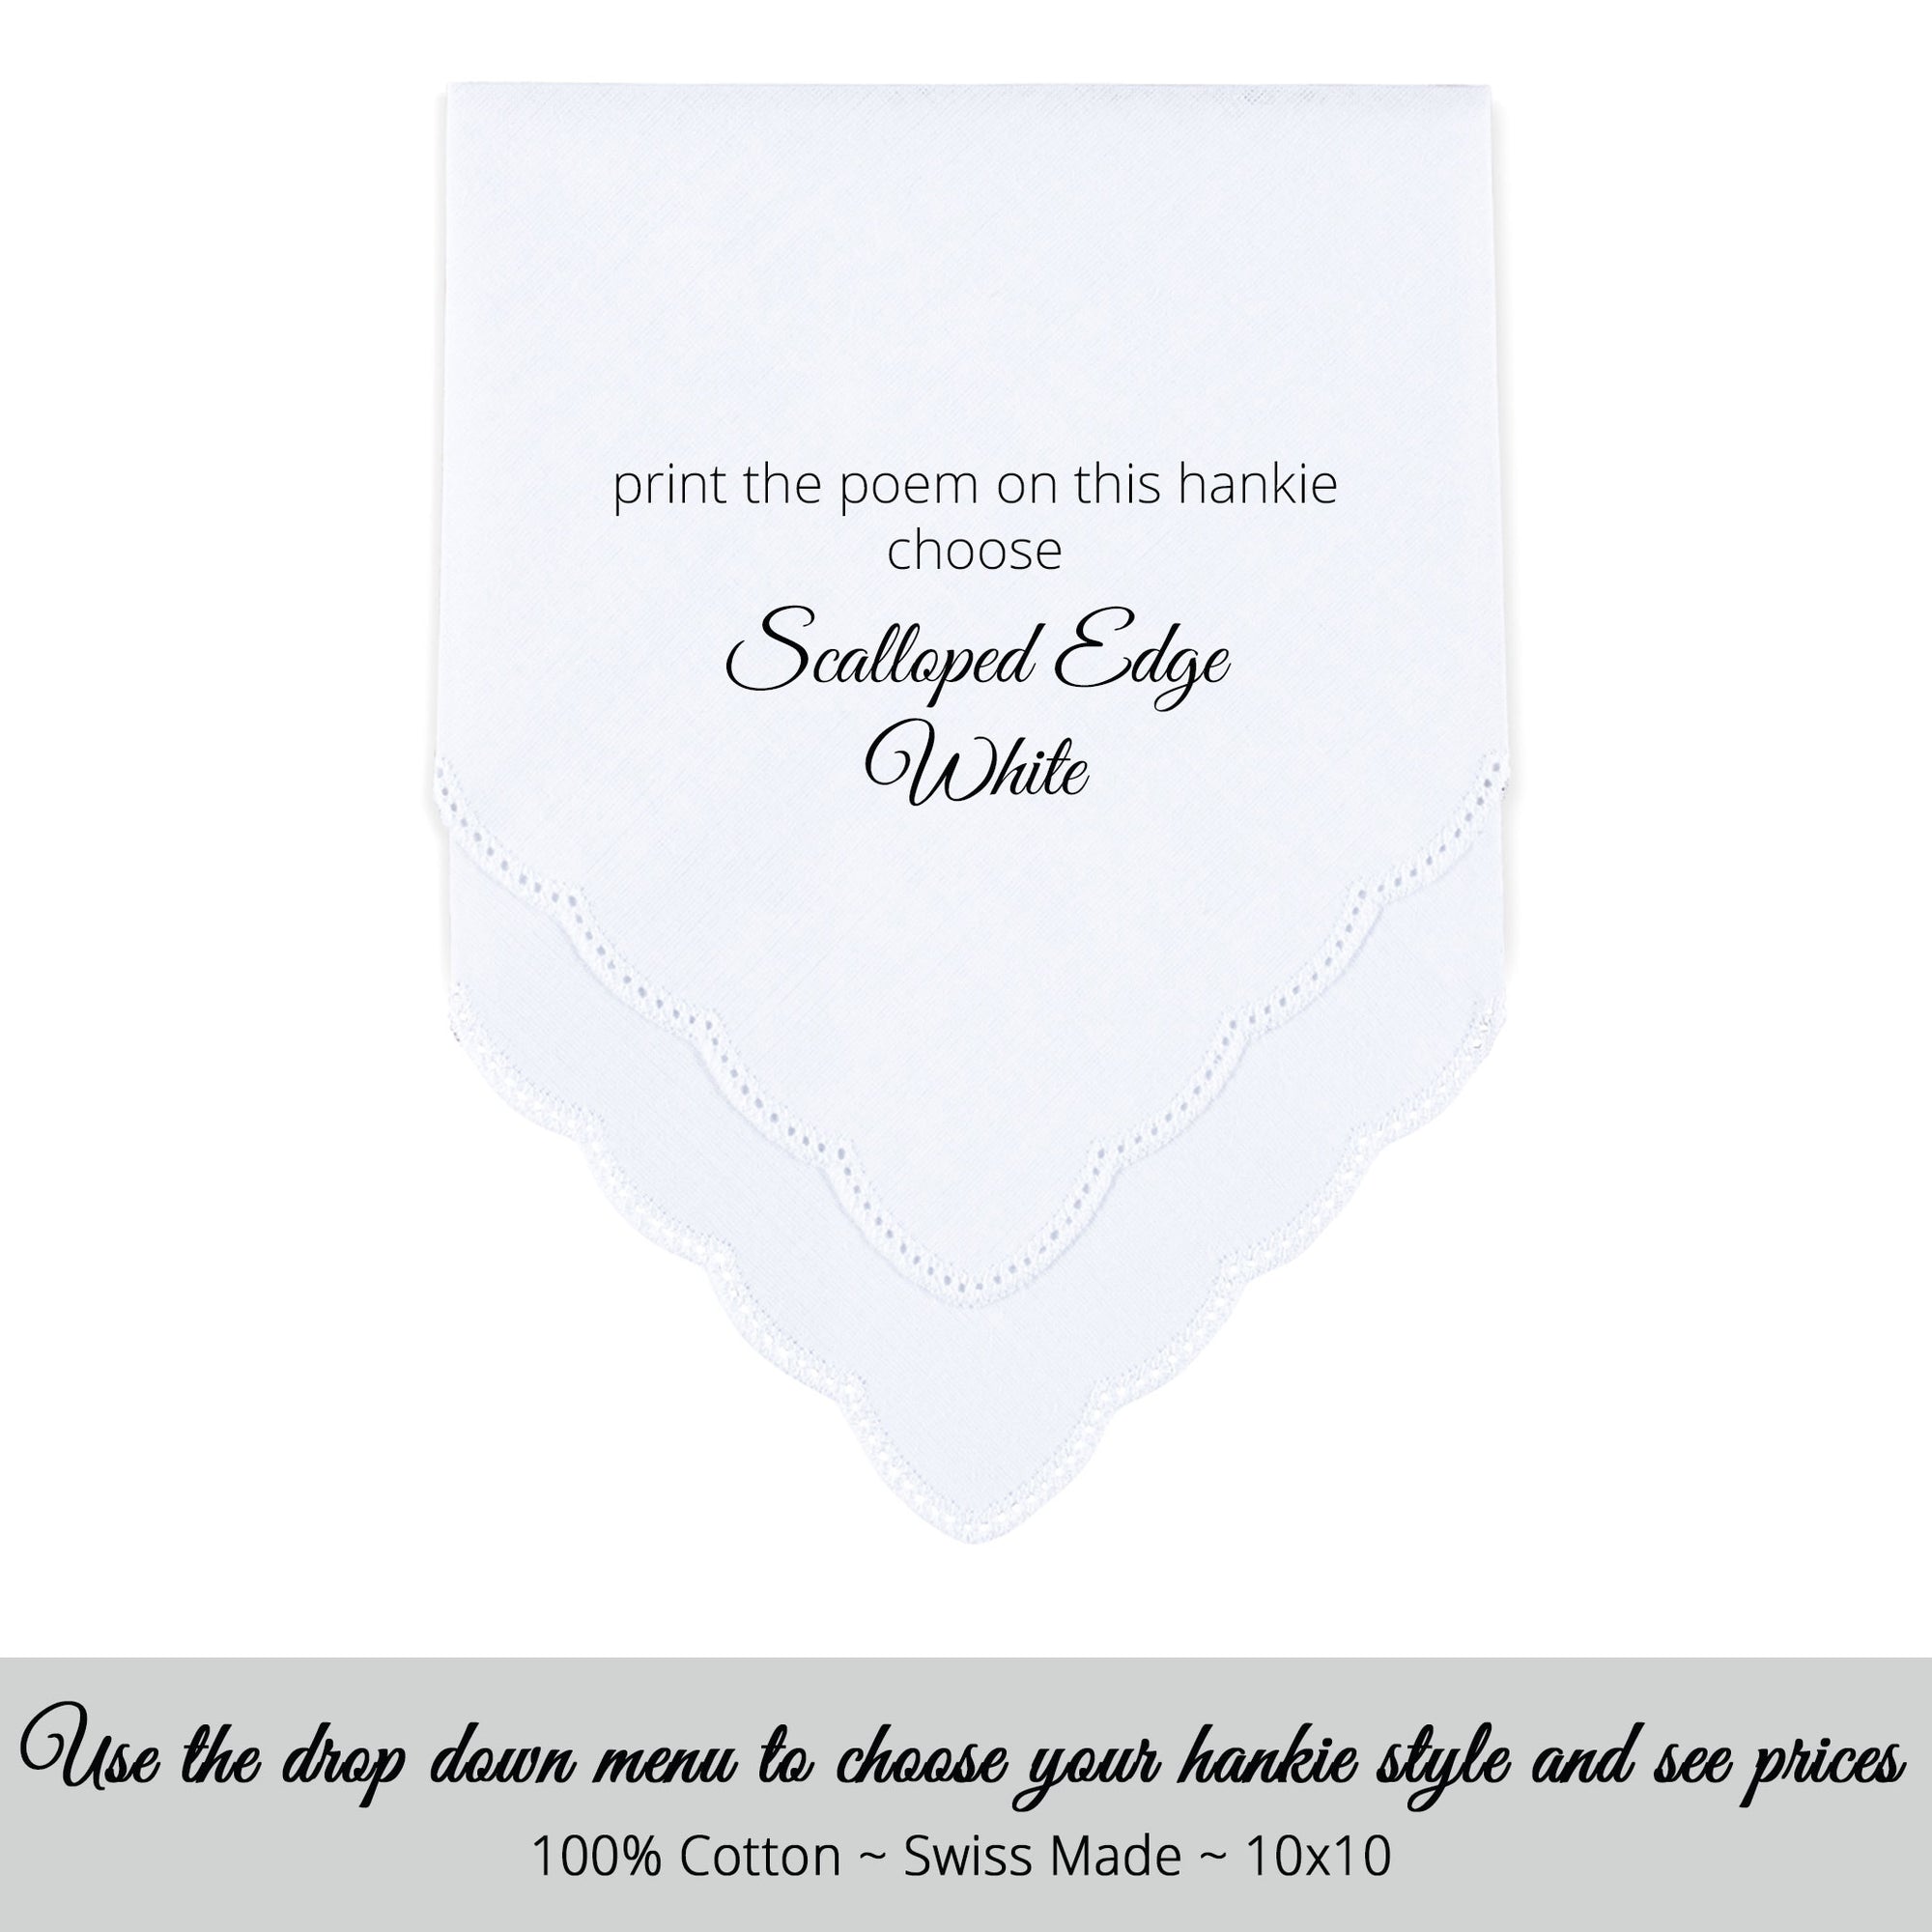 Wedding Handkerchief Scalloped edge white personalized poem for the Jr. Bridesmaid